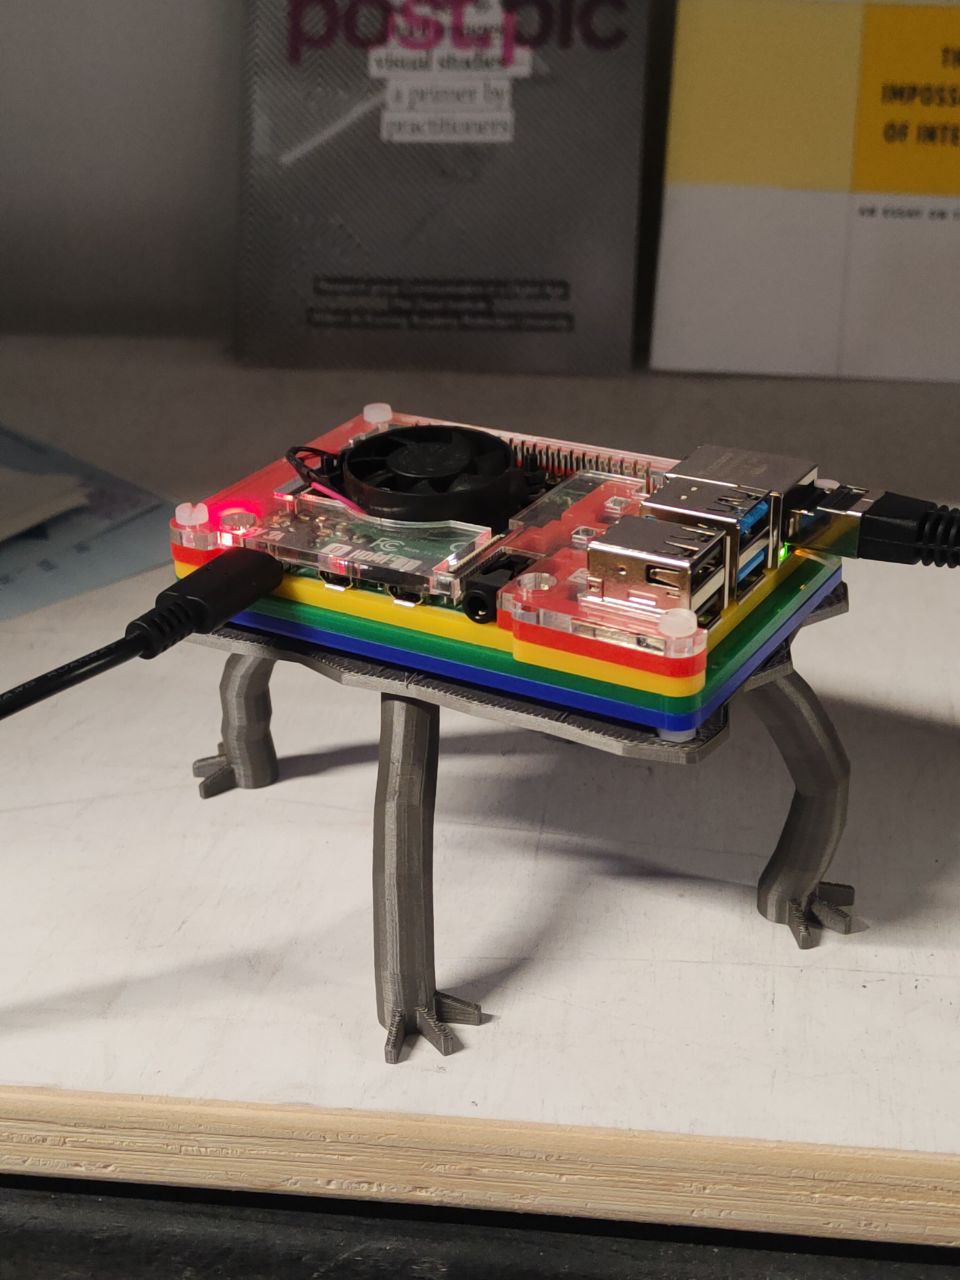 A raspberri pi 4 with a composable case made with four plastic layers: red yellow green and blue, and with custom 3d printed legs